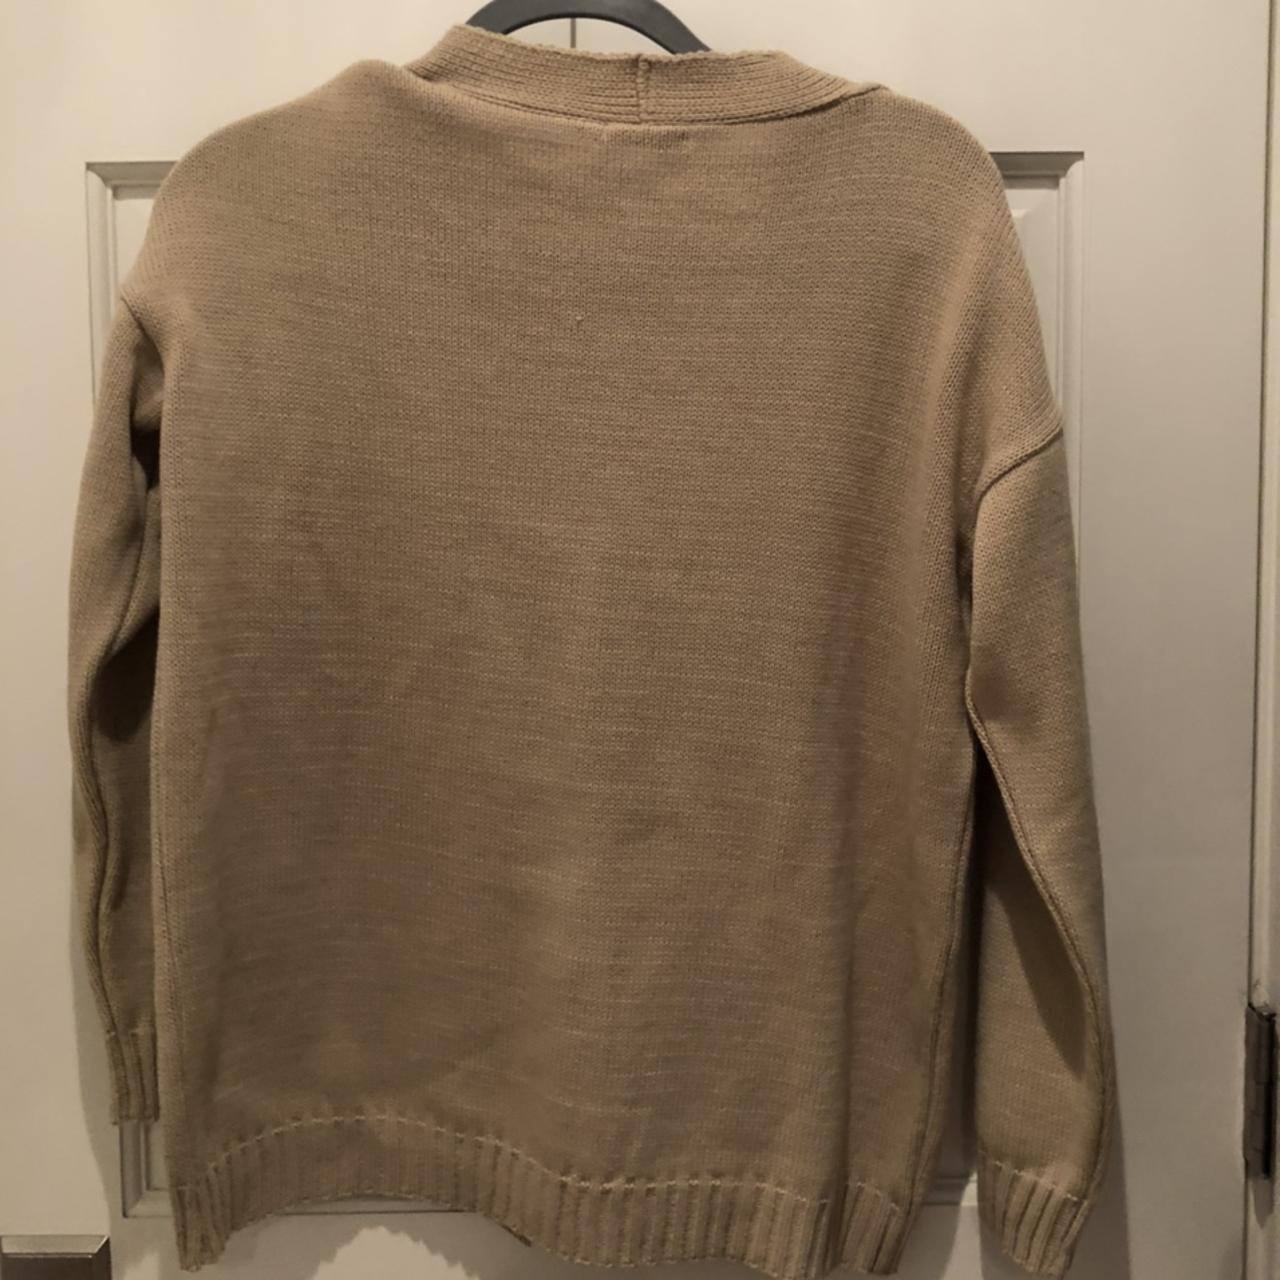 I Saw It First Women's Tan and Brown Jumper (2)